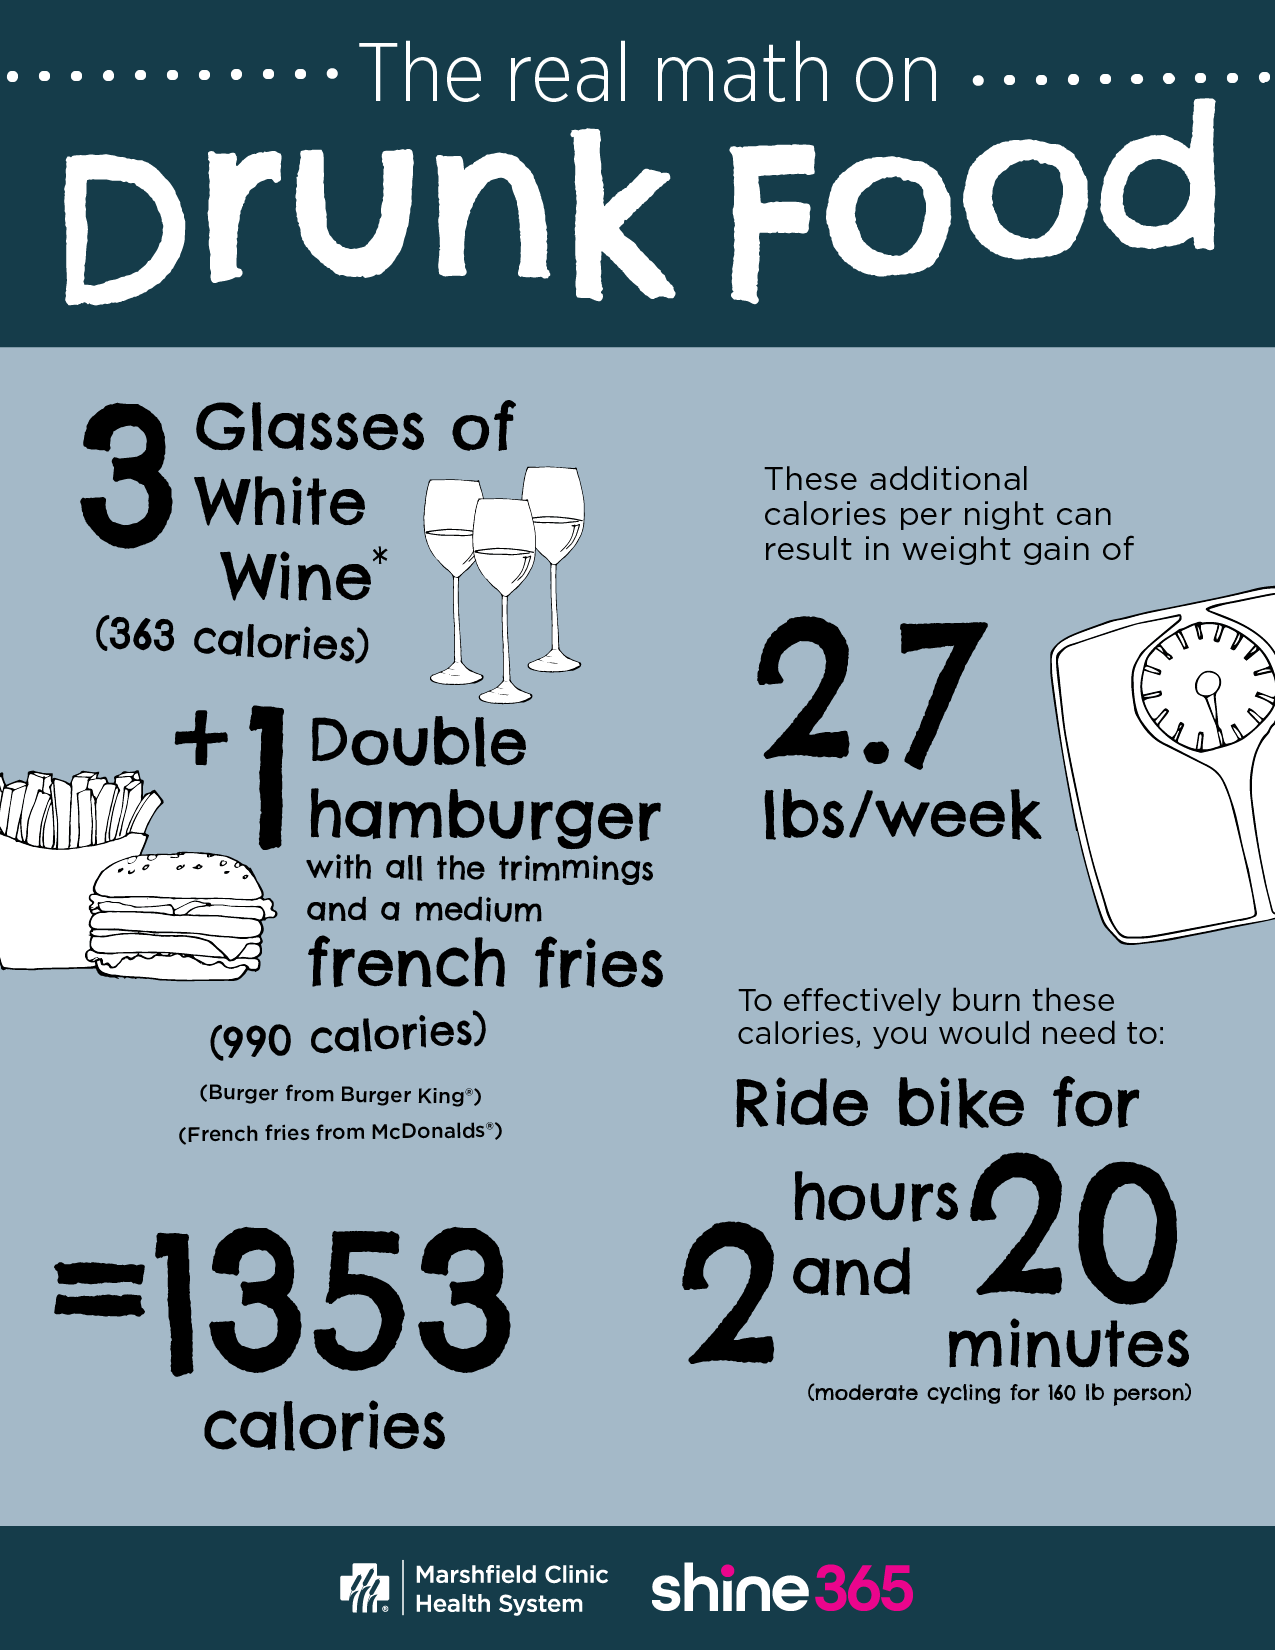 3 glasses of white wine could lead to the drunchies for a double hamburger with fries